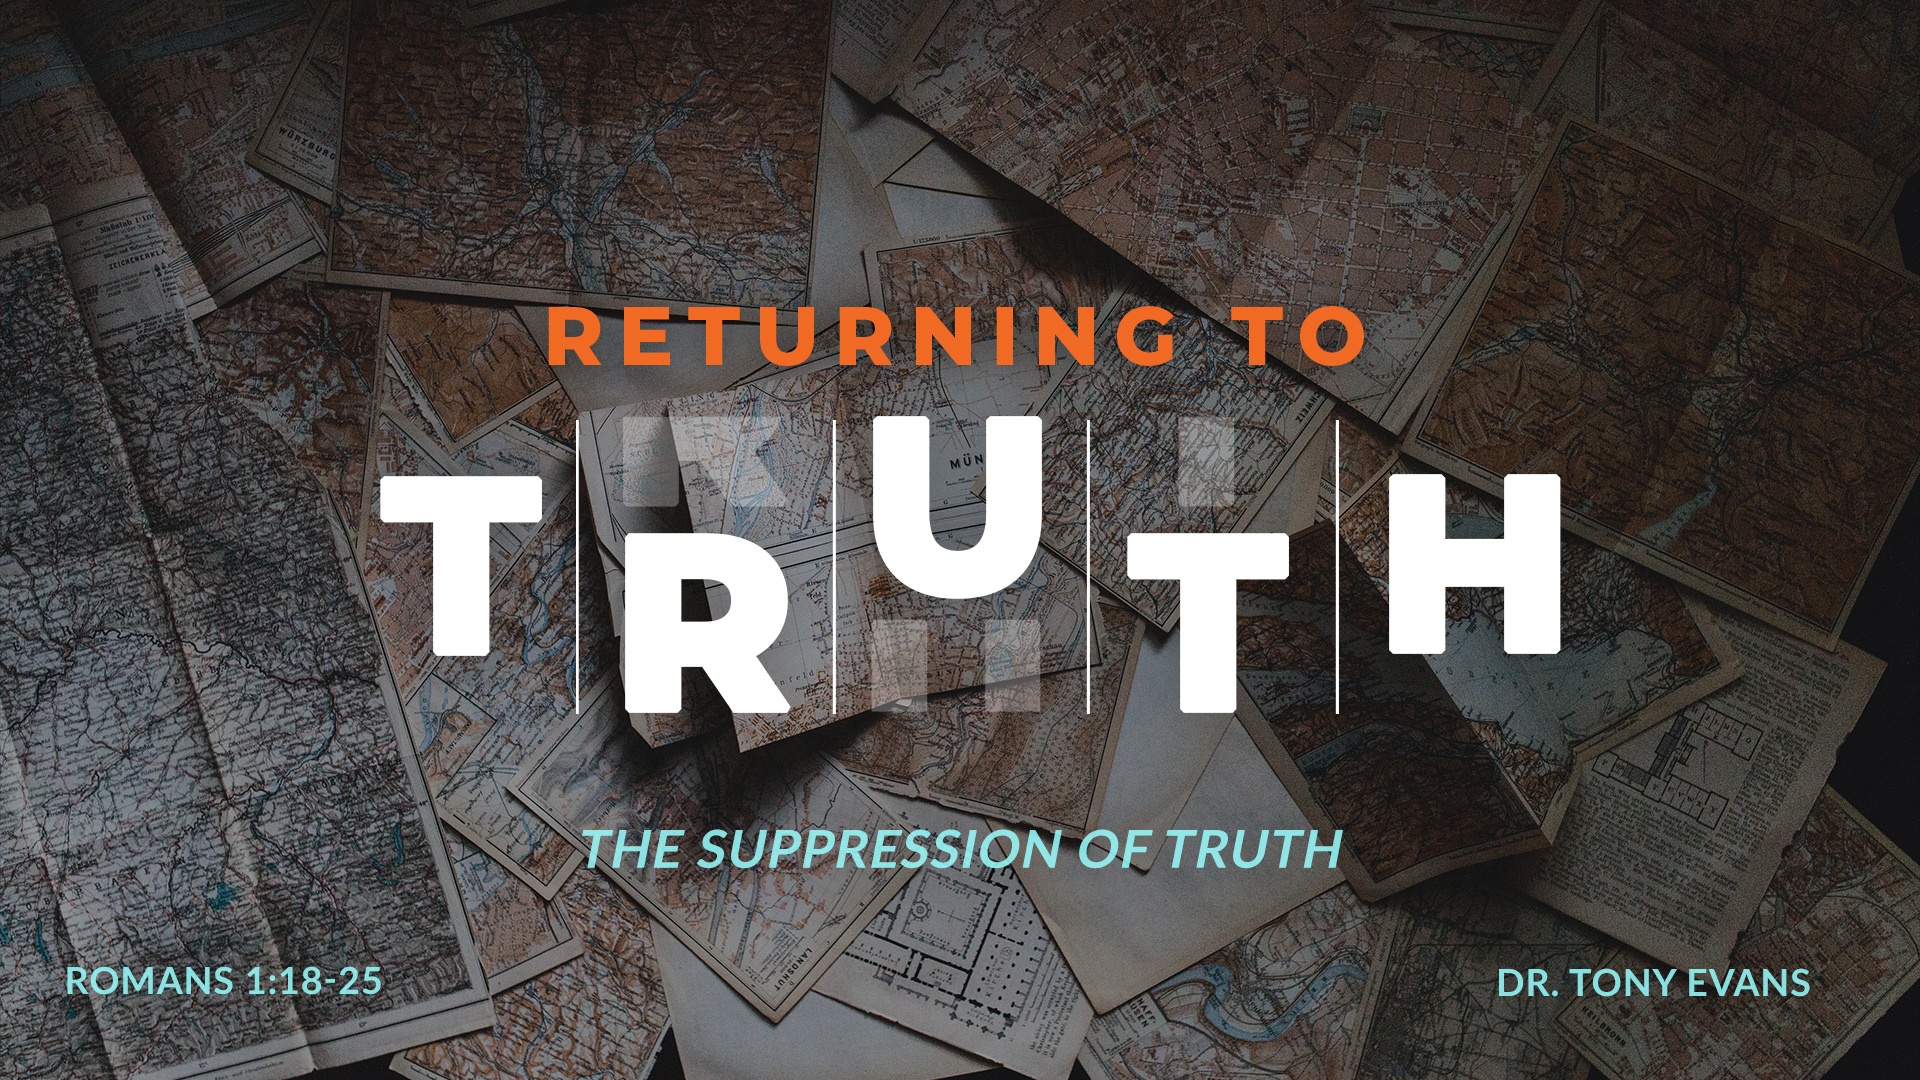 Returning to Truth: The Suppression of Truth by Dr. Tony Evans